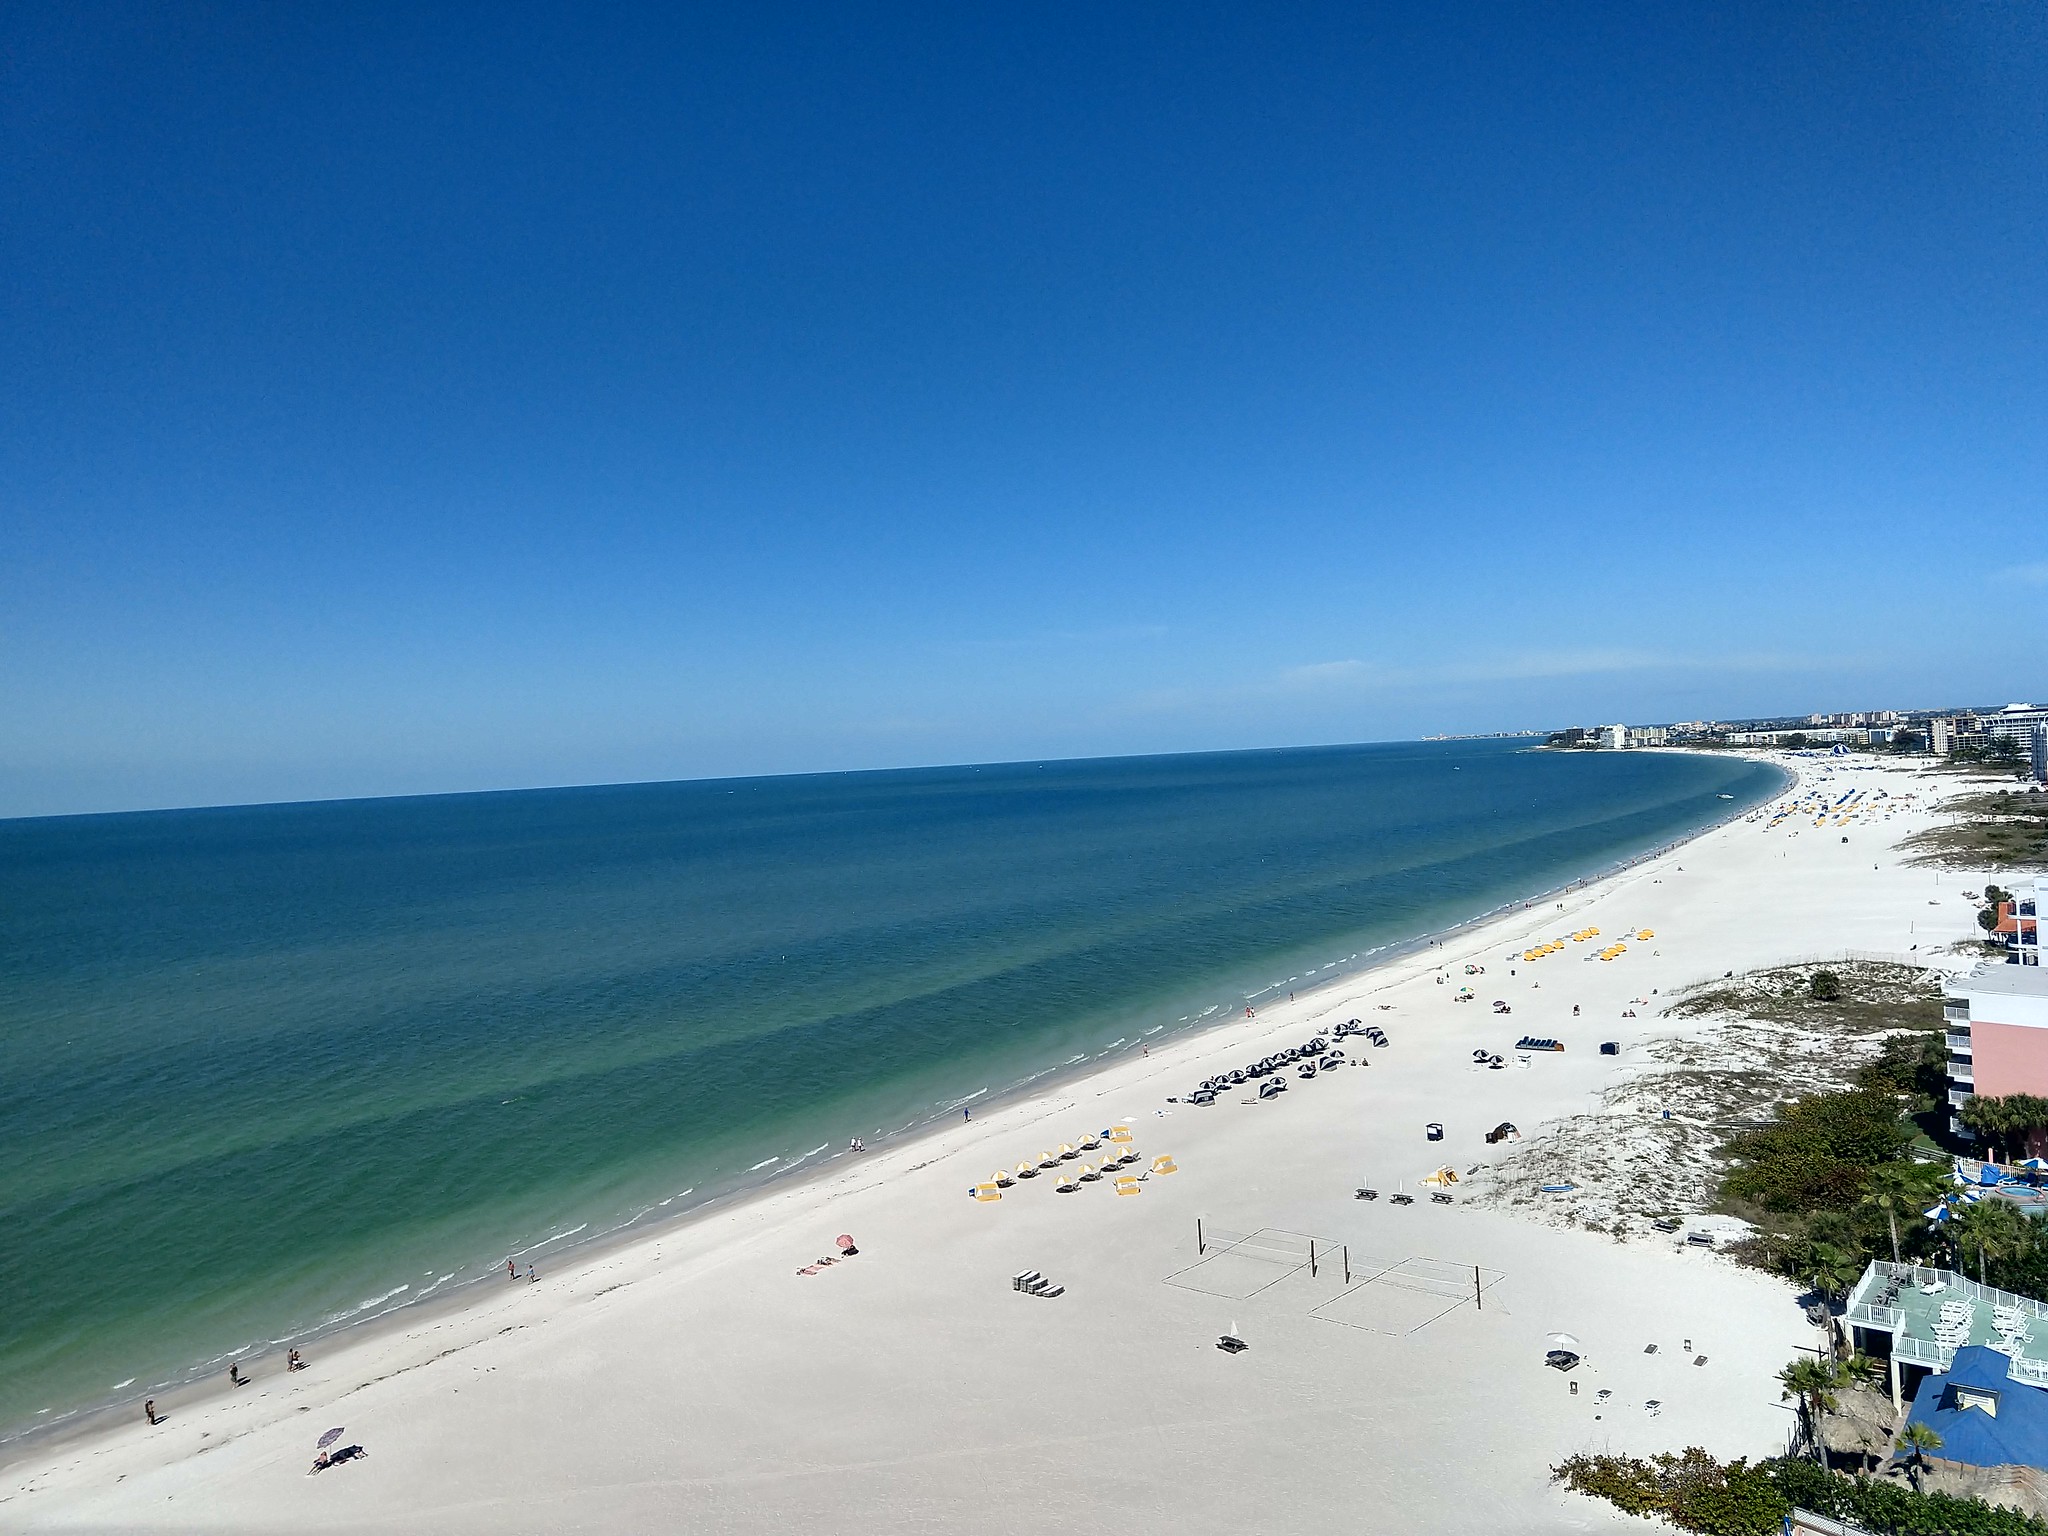 Looking North on St. Pete Beach